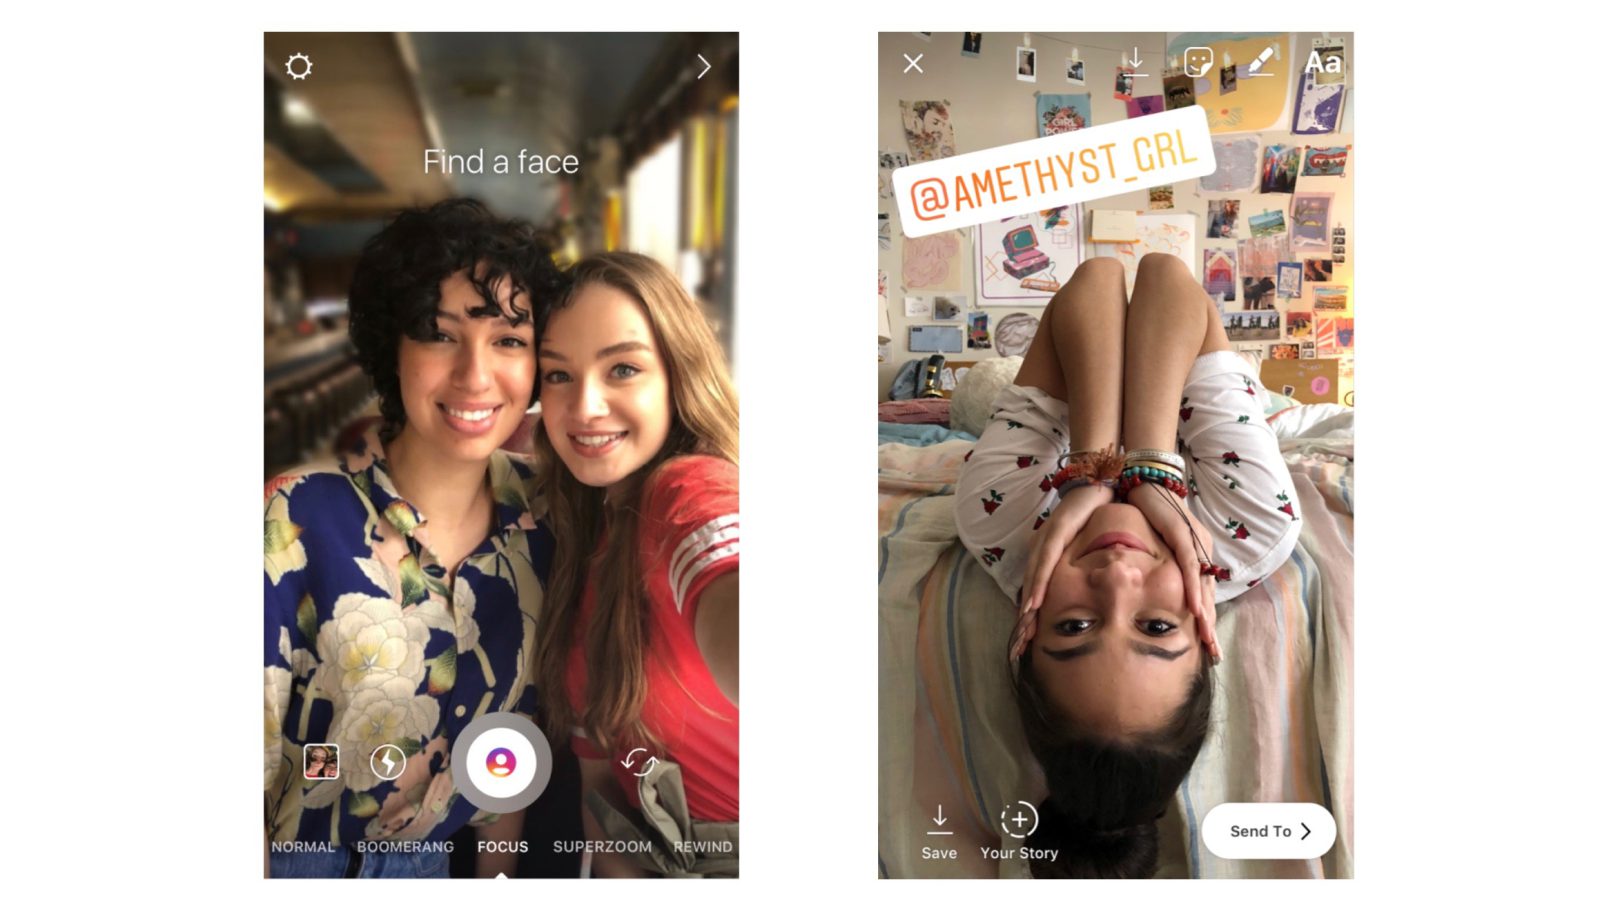 Instagram has learned to make portrait photos with the effect of "blurring"